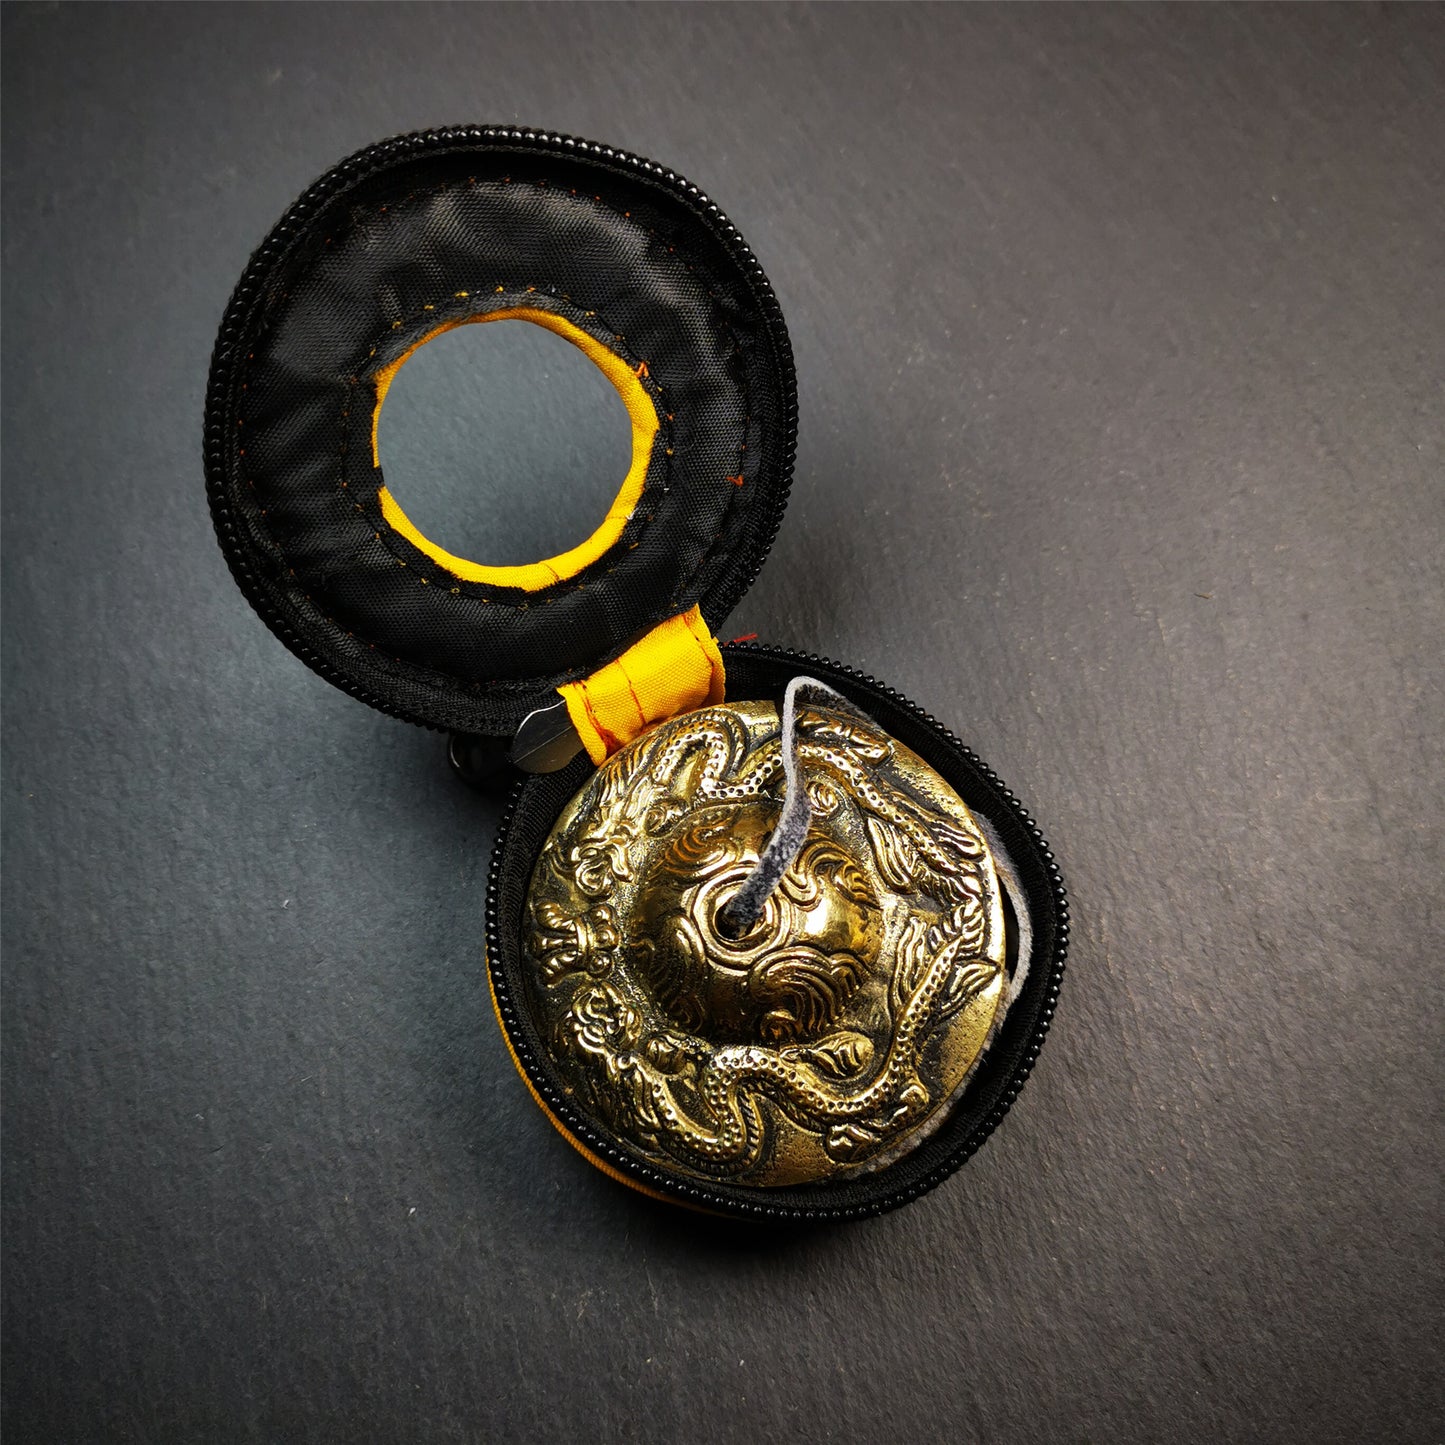 This tingsha bell set was handmade in Nepal,using traditional techniques and materials. It was made of brass,carved 2 dragons pattern,6.5cm diameter,with pure, clear and resonant,good for meditation. Come with tingsha case.